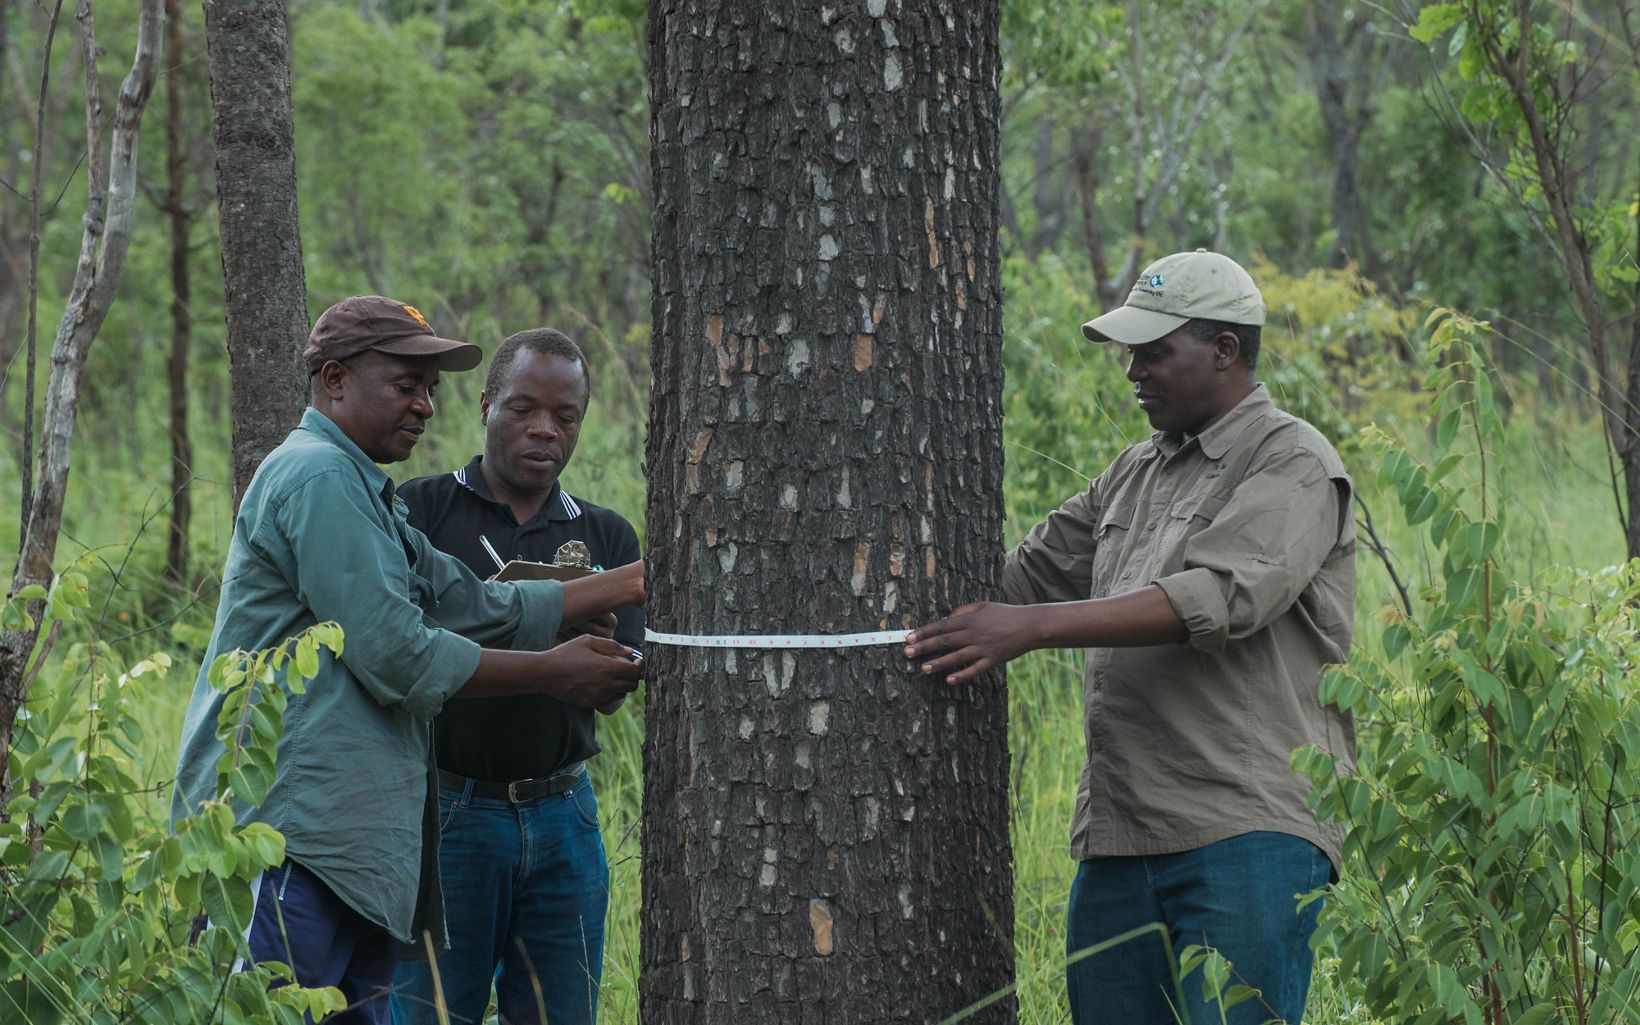 Three men measure a tree trunk by wrapping a measuring tape around it.